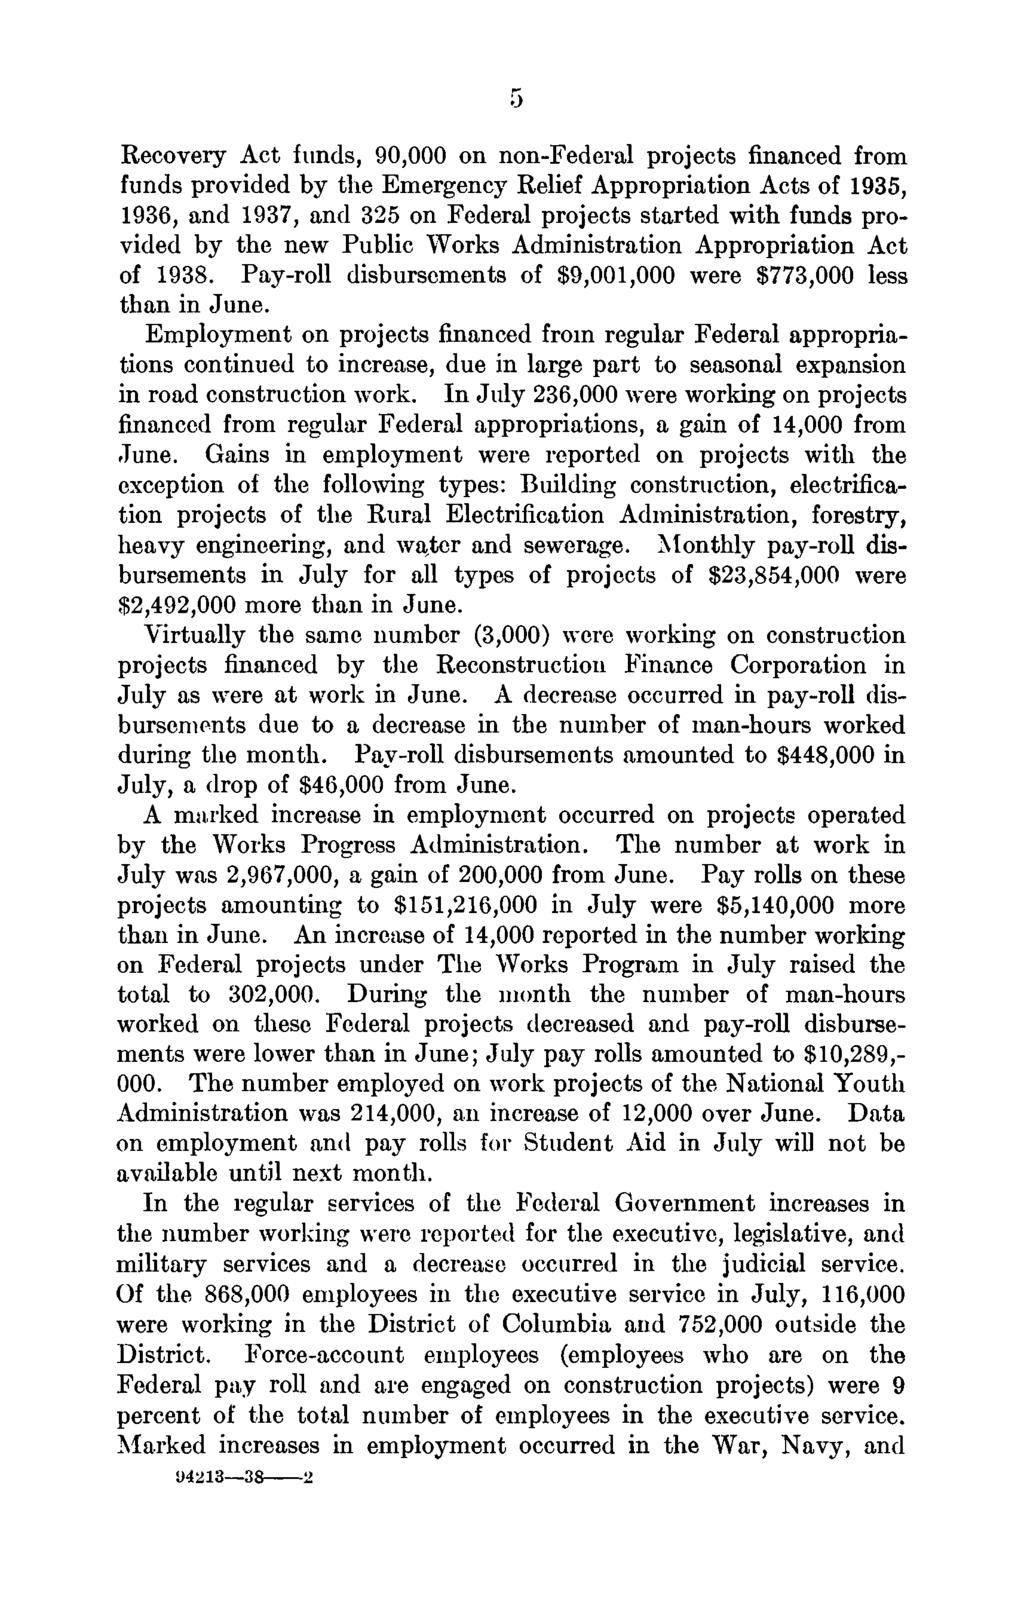 Recovery Act funds, 90,000 on non-federal projects financed from funds provided by the Emergency Relief Appropriation Acts of 1935, 1936, and, and 325 on Federal projects started with funds provided